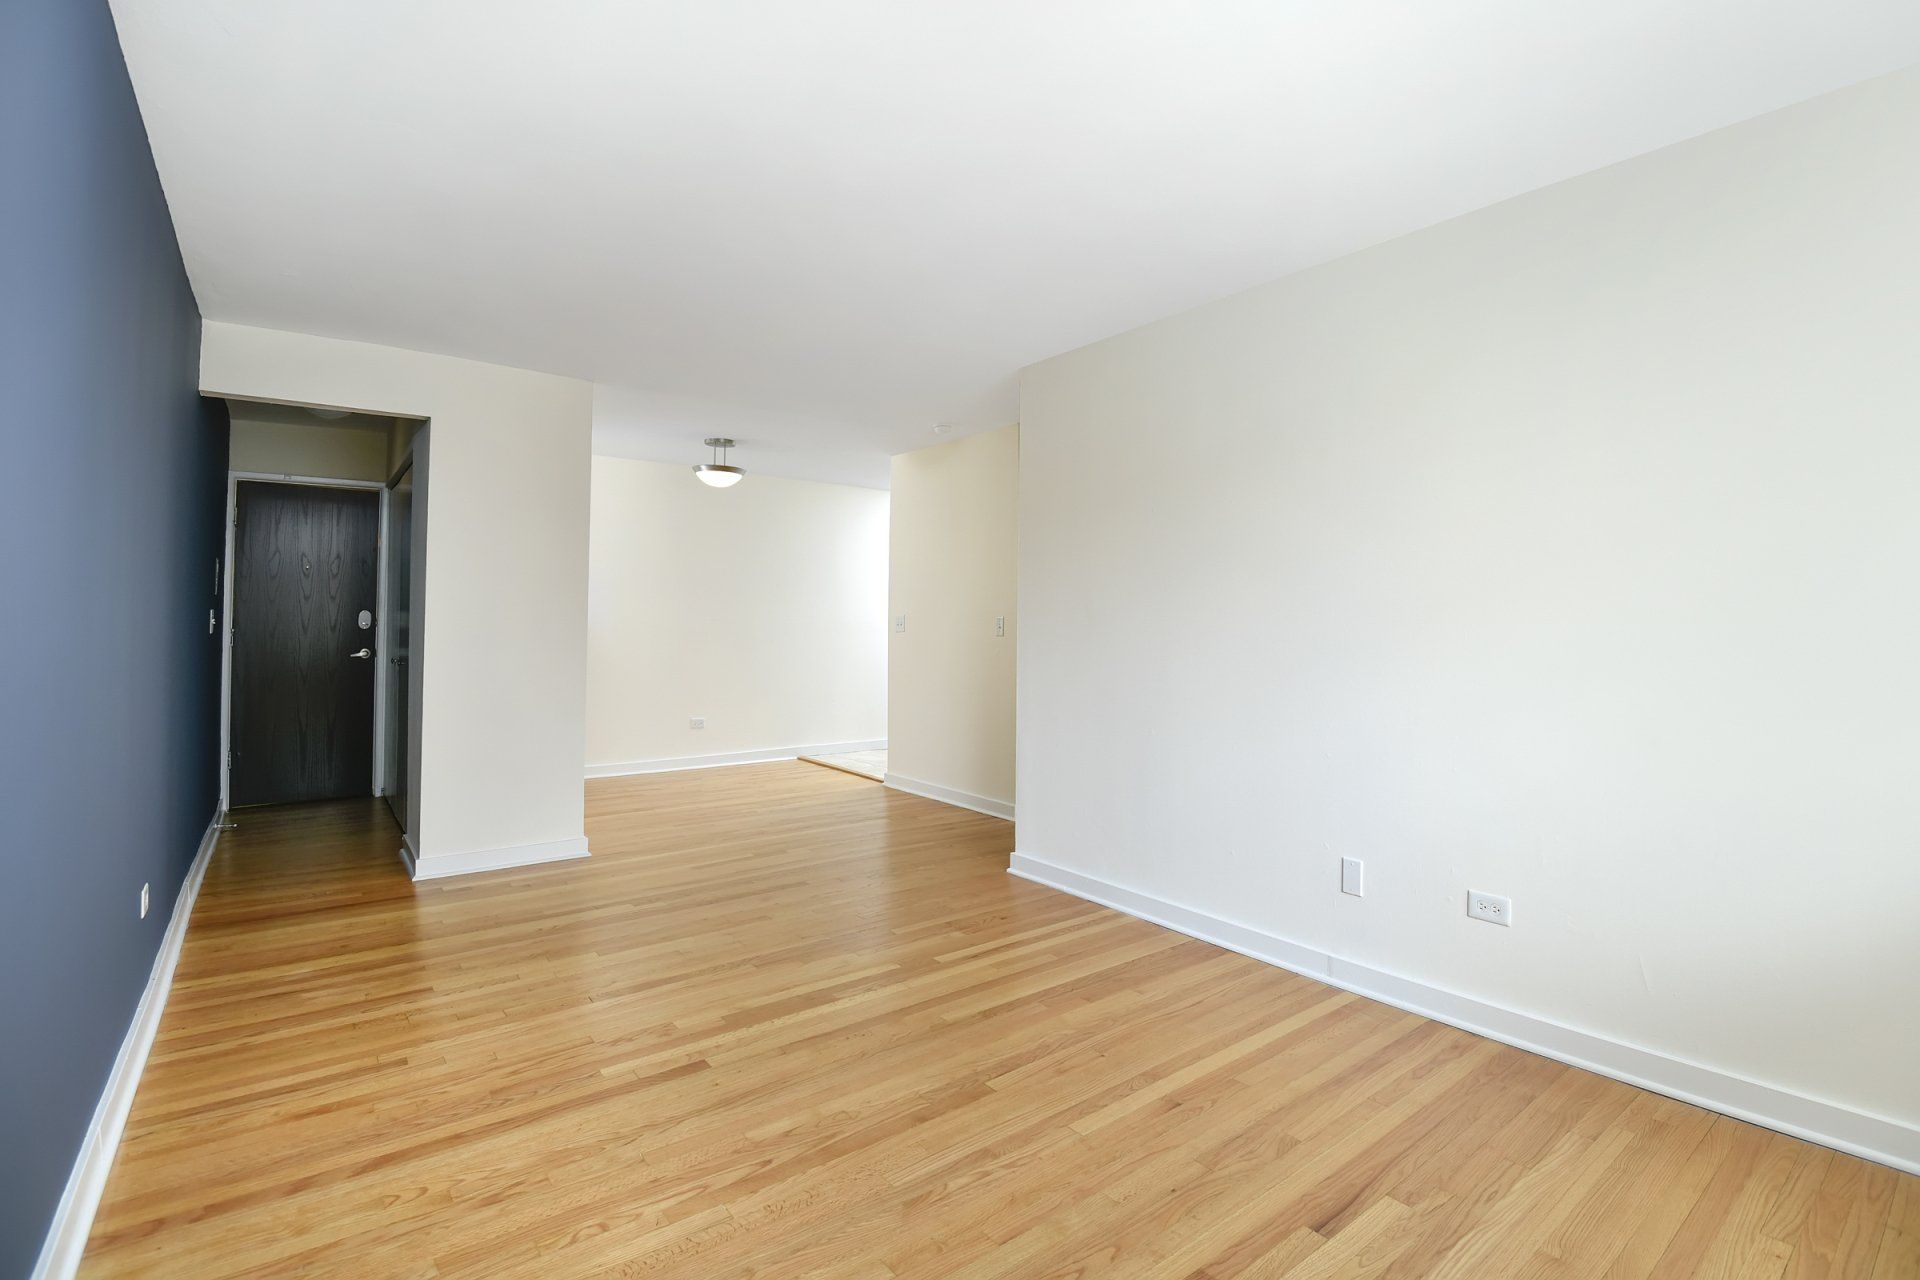 Empty room with wood floors at Reside on Stratford.